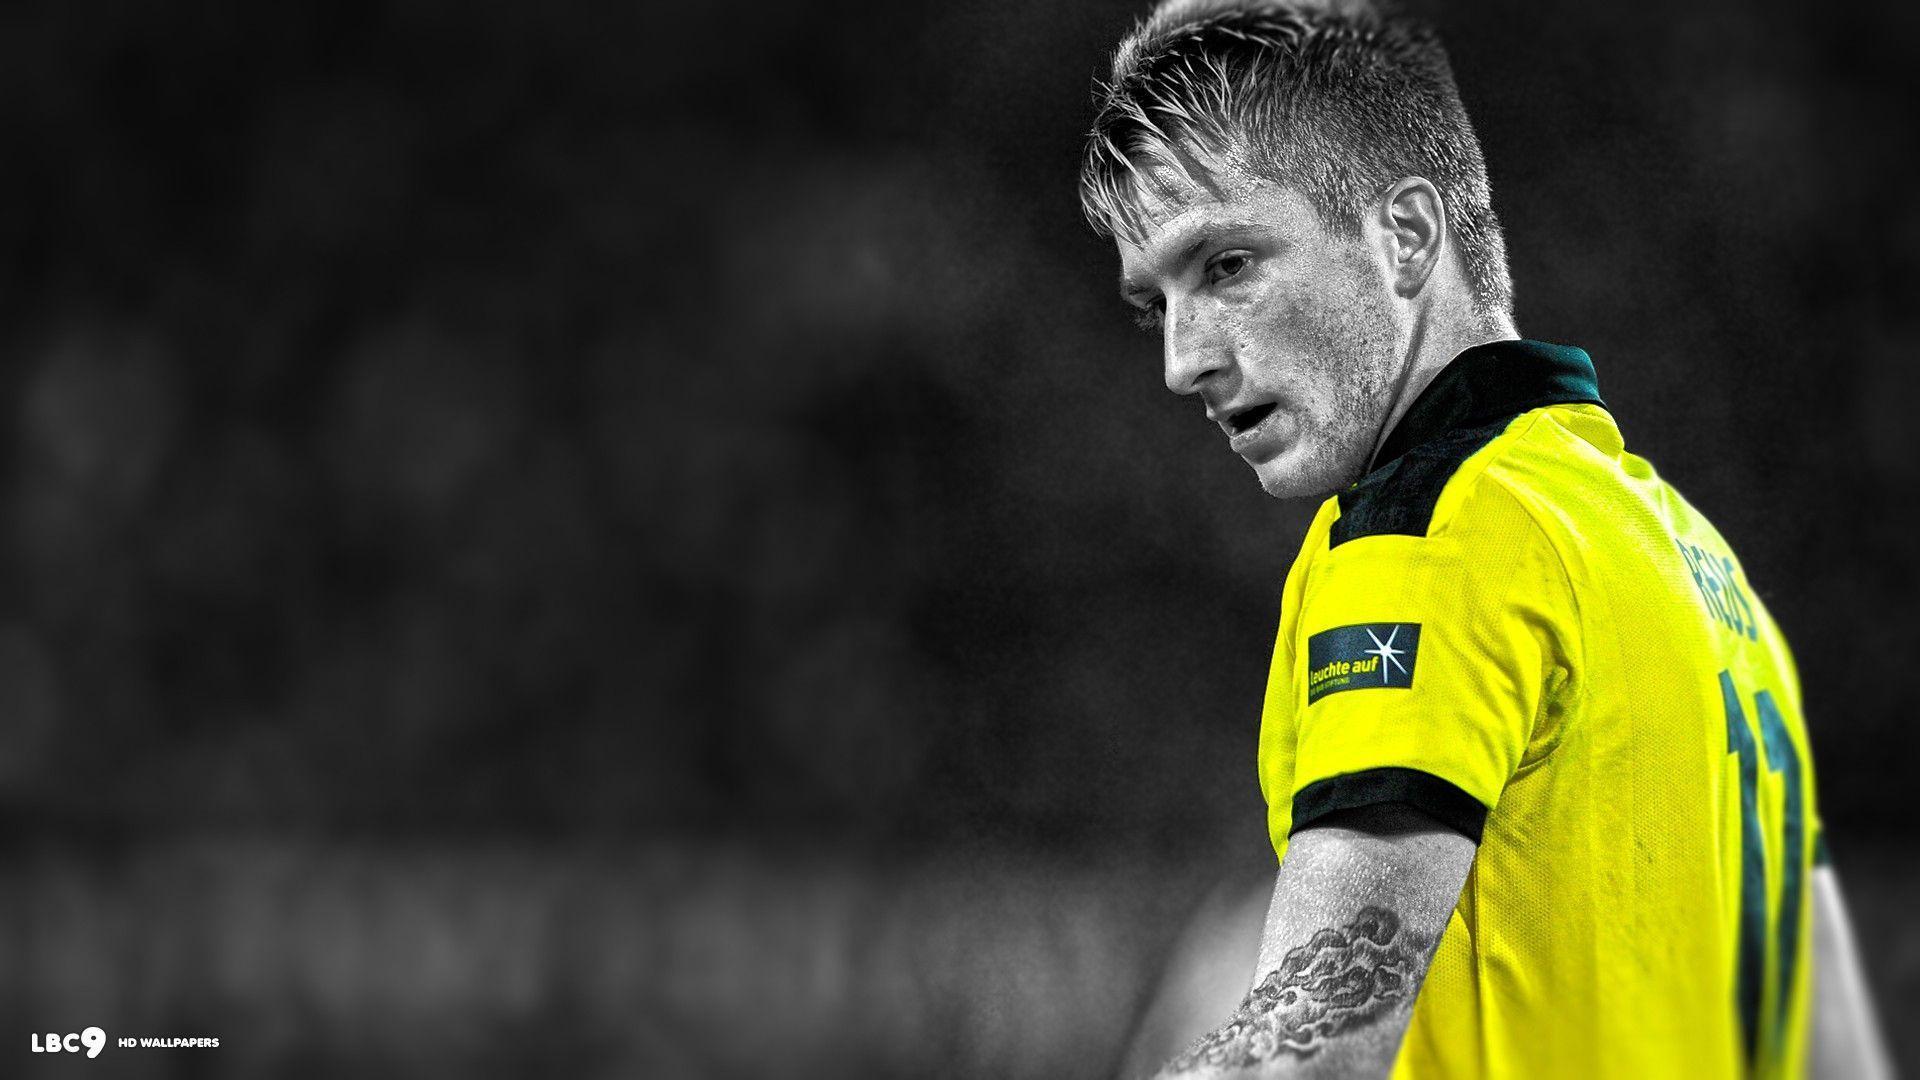 Marco Reus Wallpaper 1 6. Players HD Background